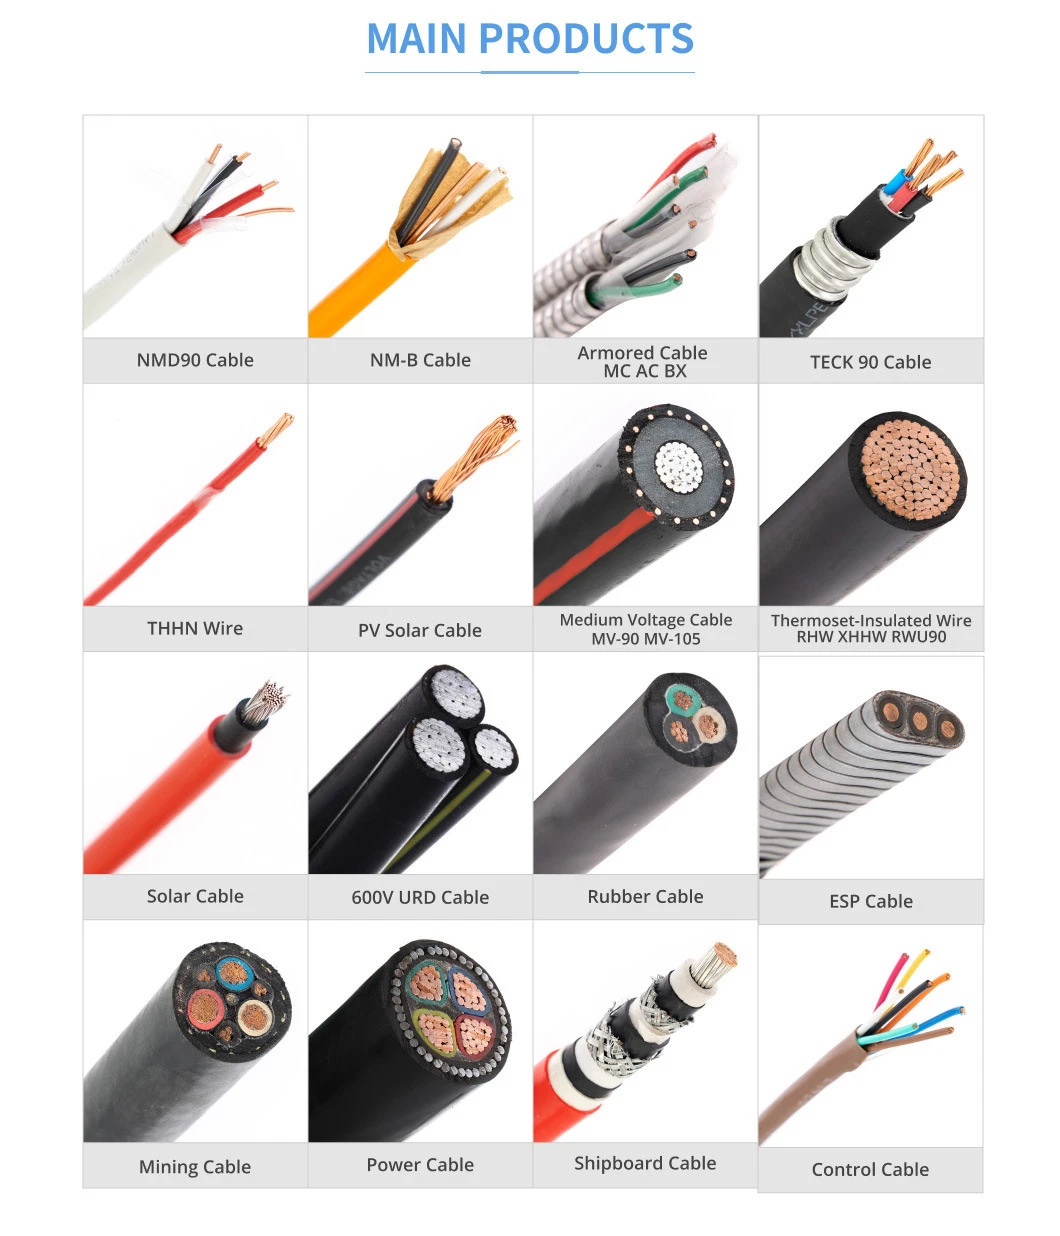 Hot Sale Rubber Insulated Power Cable 2.5 mm 150mm Yc Yz Yzw Ycw Multi Core Rubber Cable Electric Wire Cable